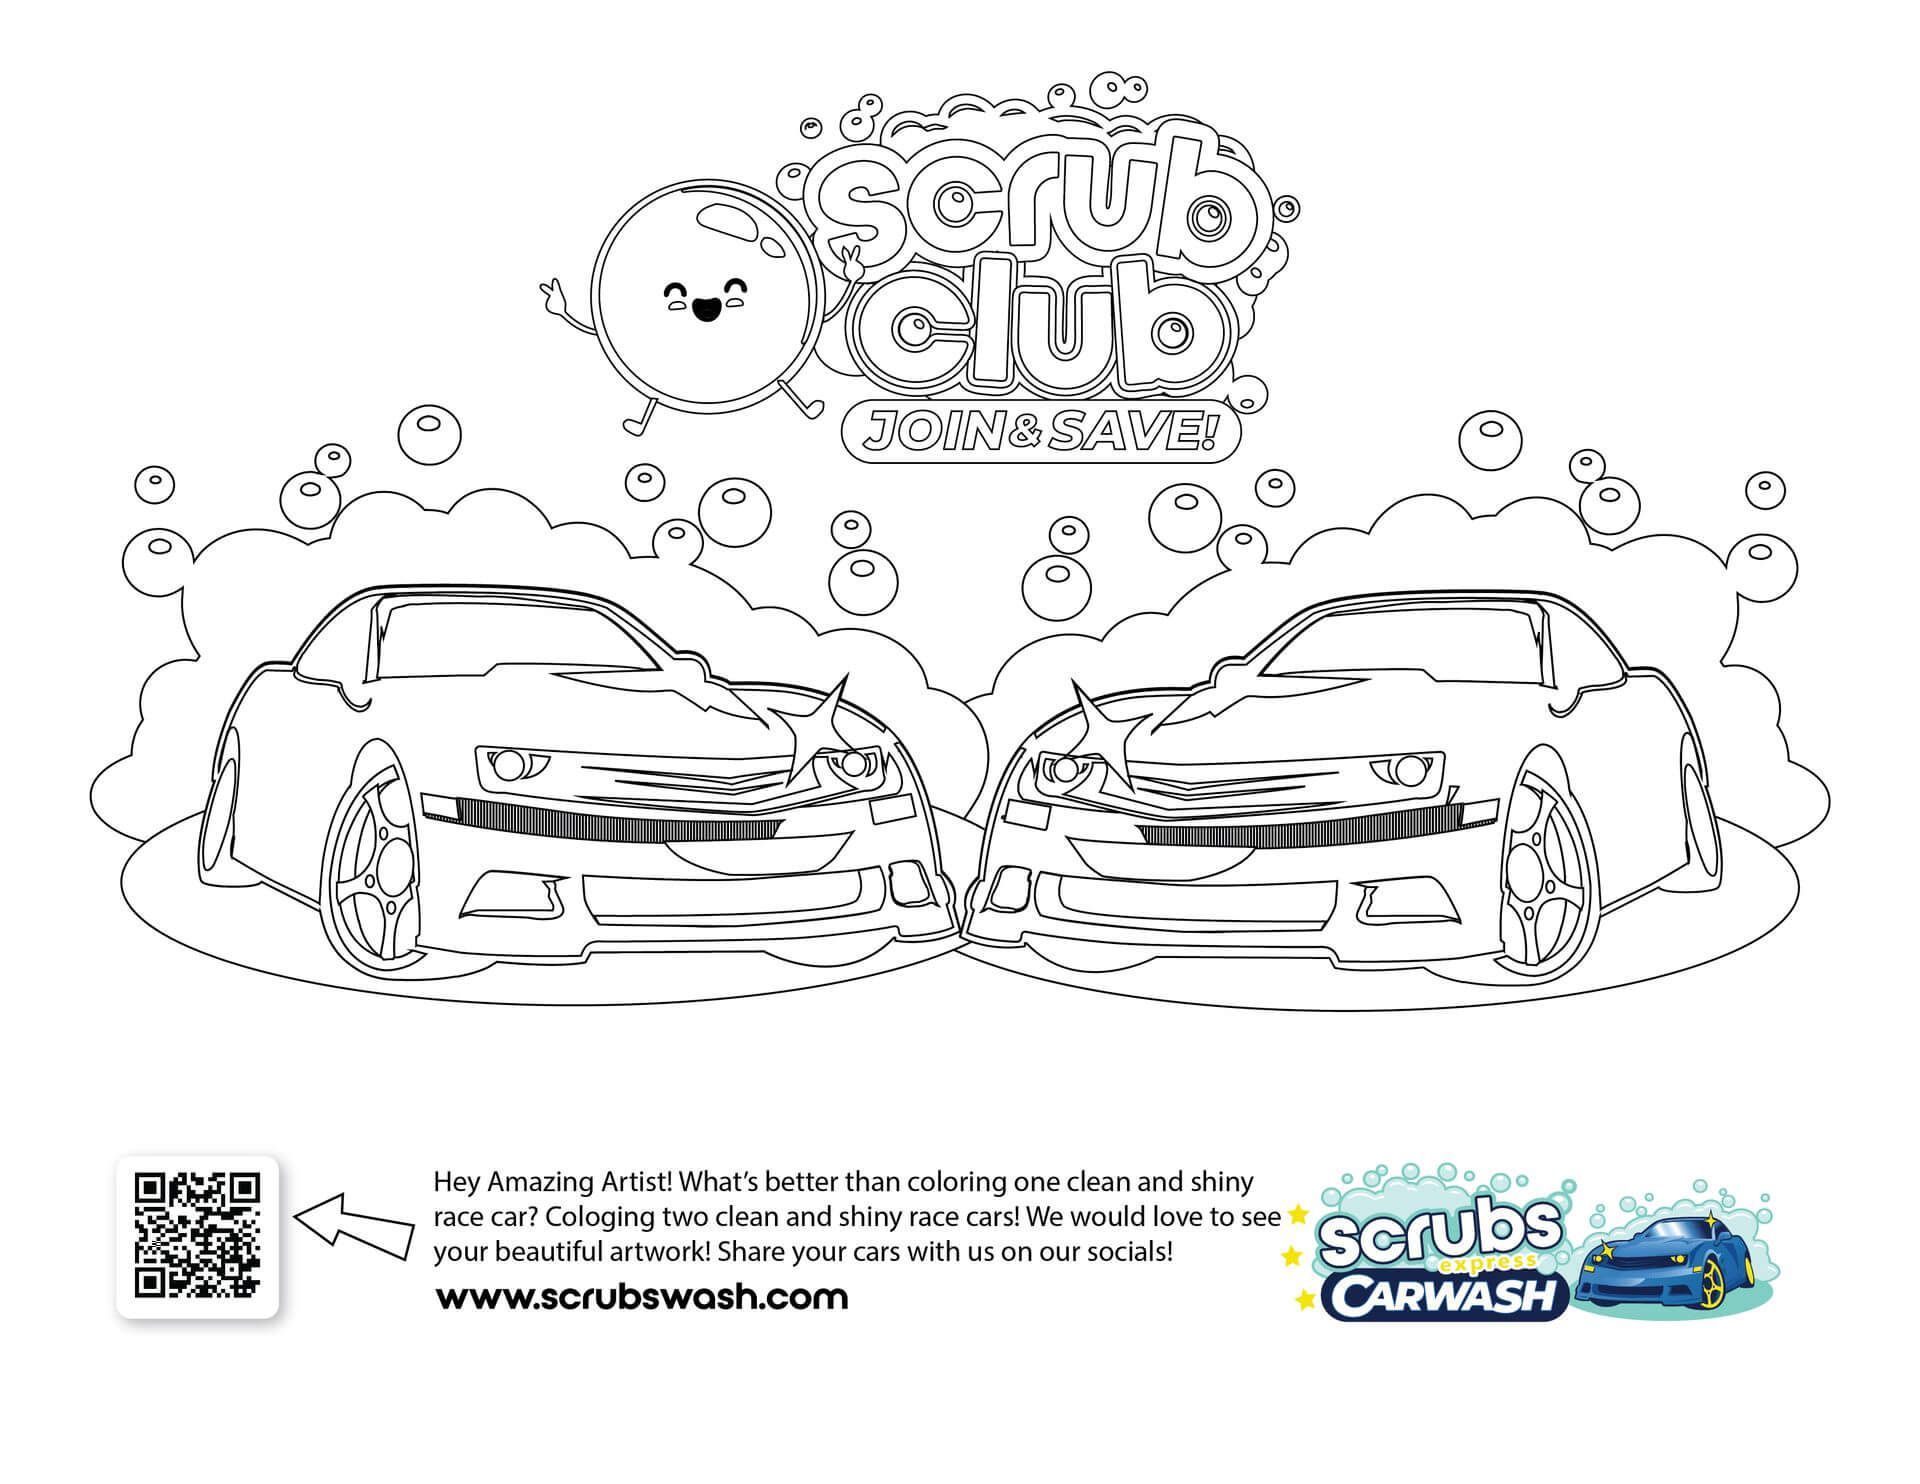 Free download and print coloring pages of Scrub's Carwash car from Scrubs Carwash. A black and white drawing of two race cars car with bubbles around it for kids and adults to color. Scrubs wash scrub club at the top.